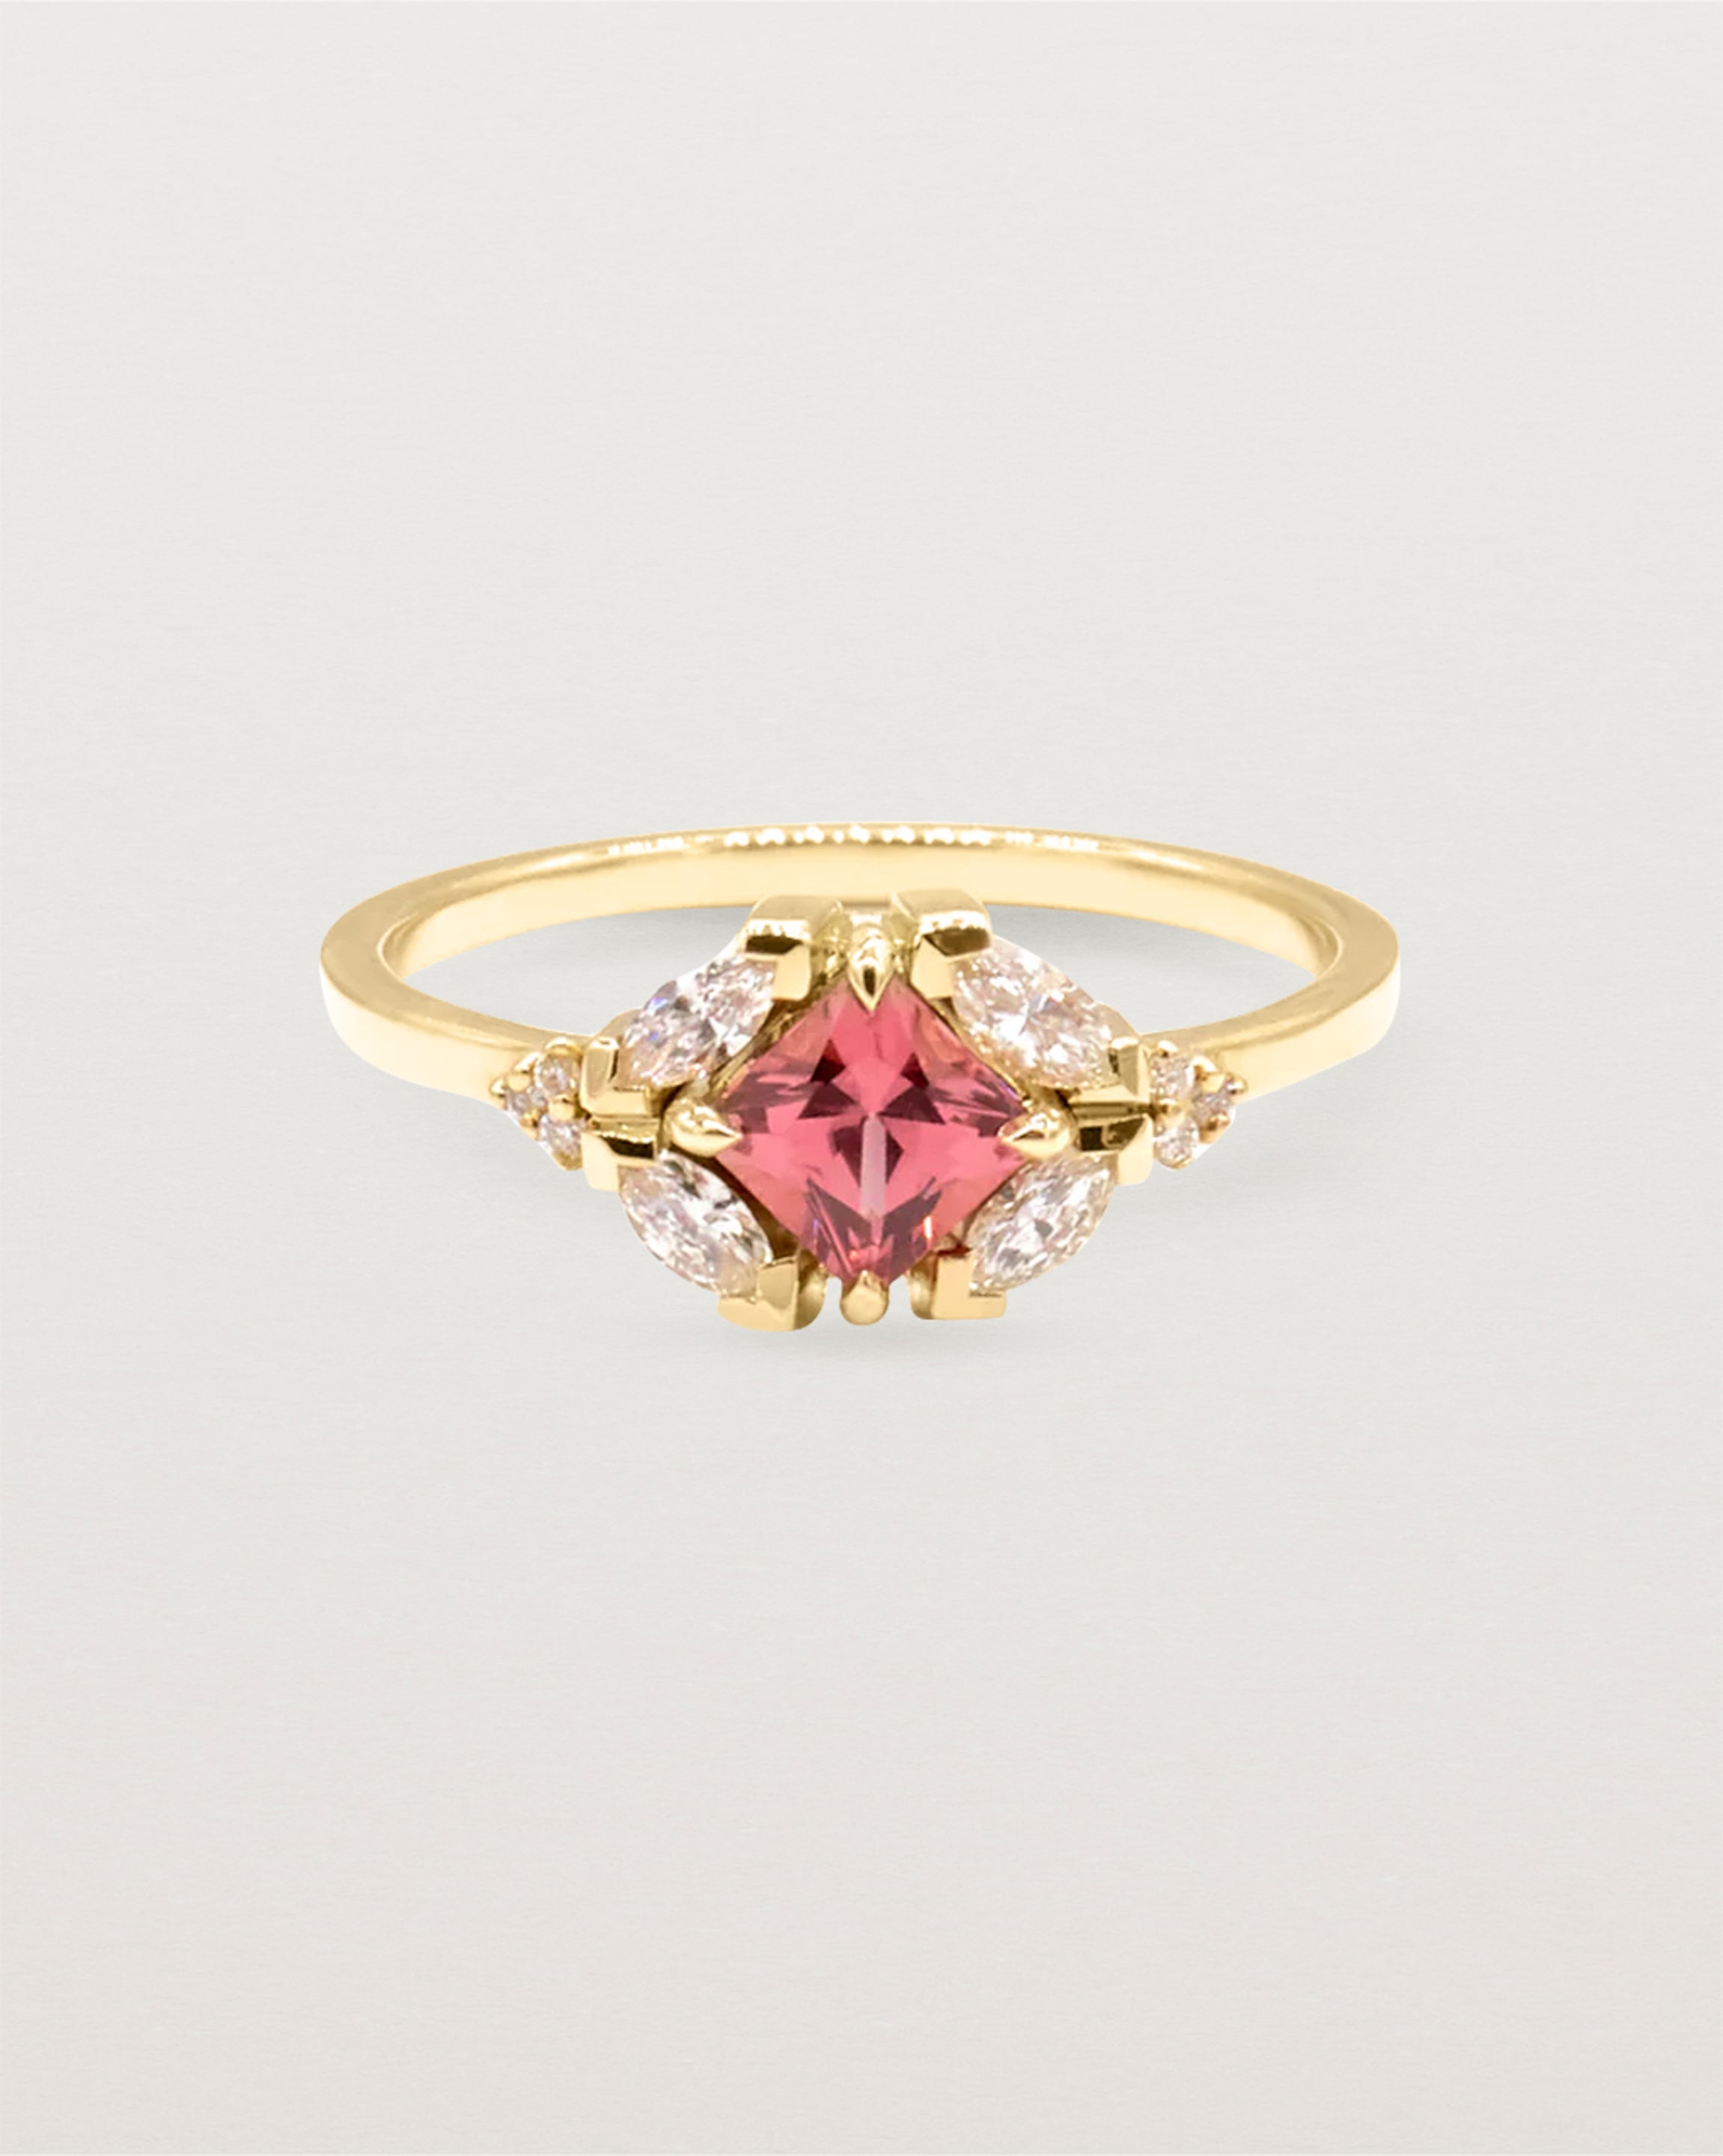 An asscher cut pink spinel is heroes by white diamond clusters set in yellow gold.